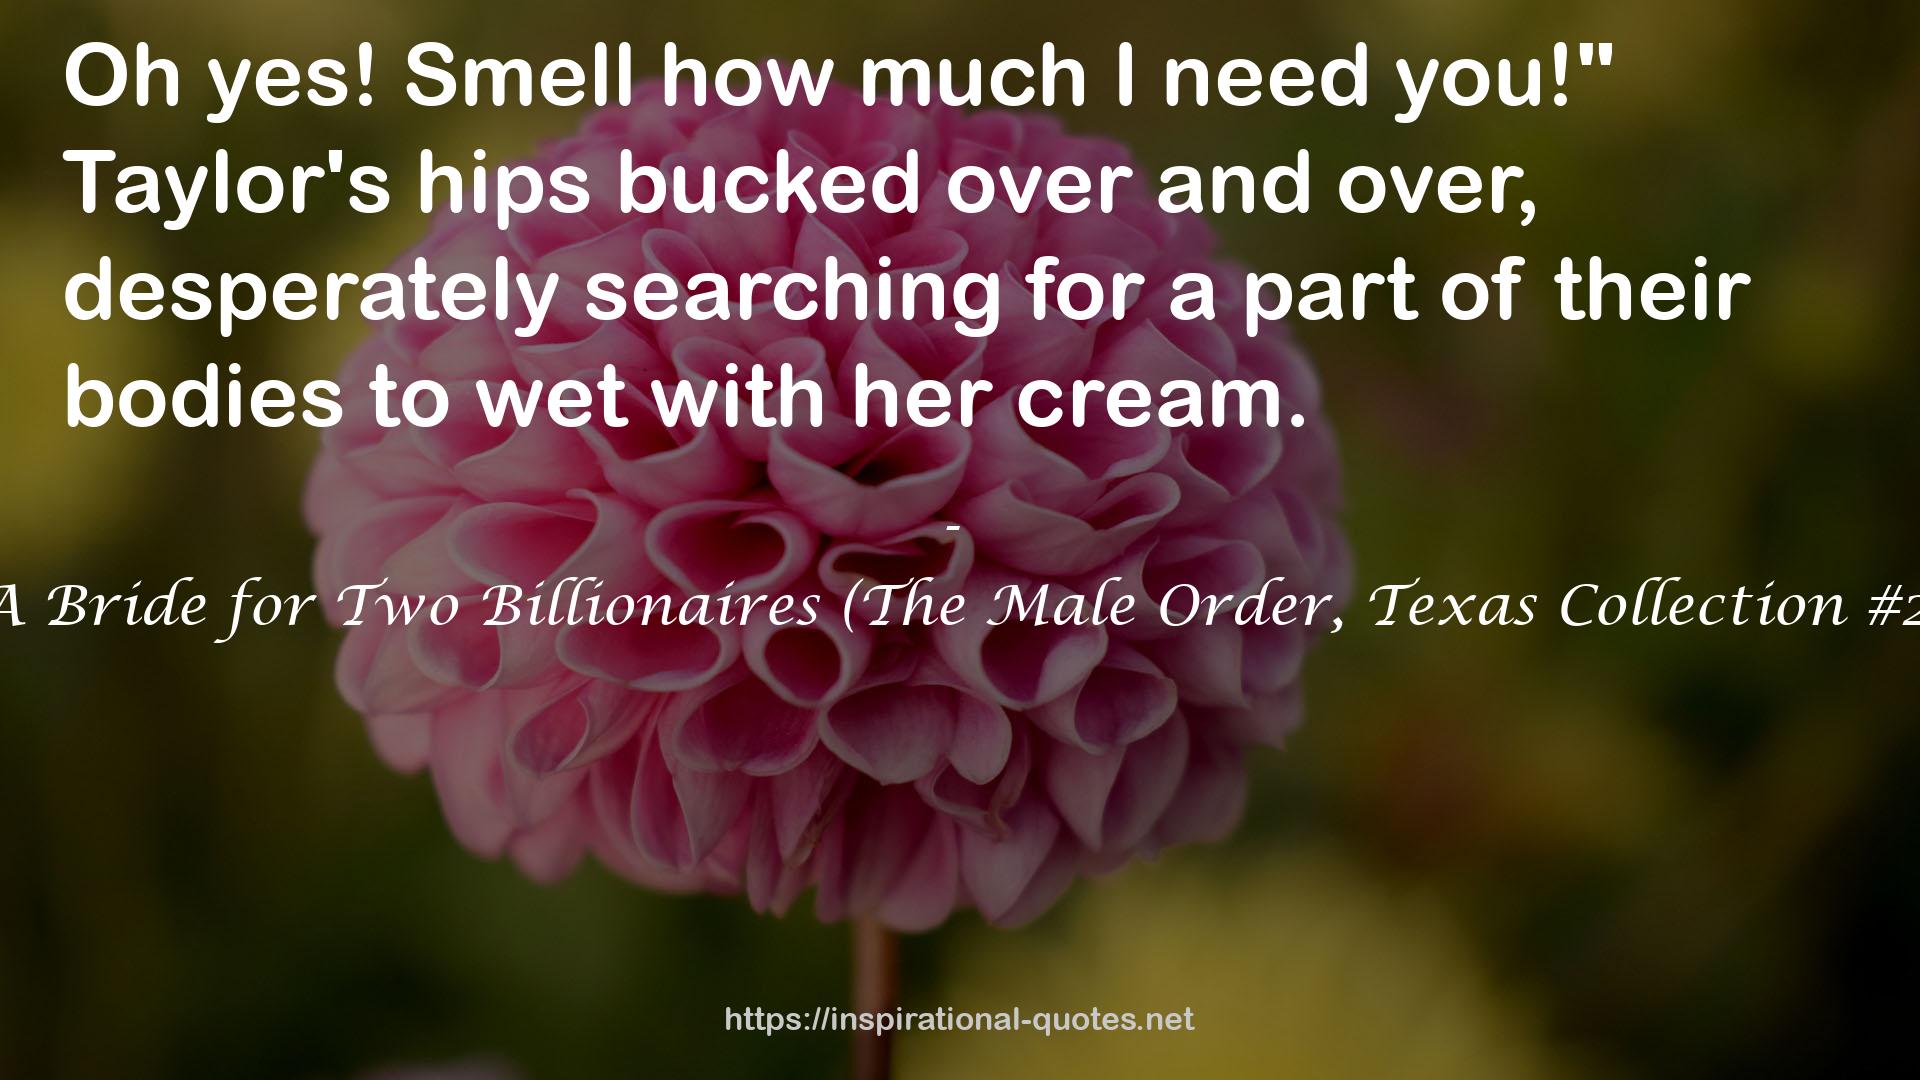 A Bride for Two Billionaires (The Male Order, Texas Collection #2) QUOTES